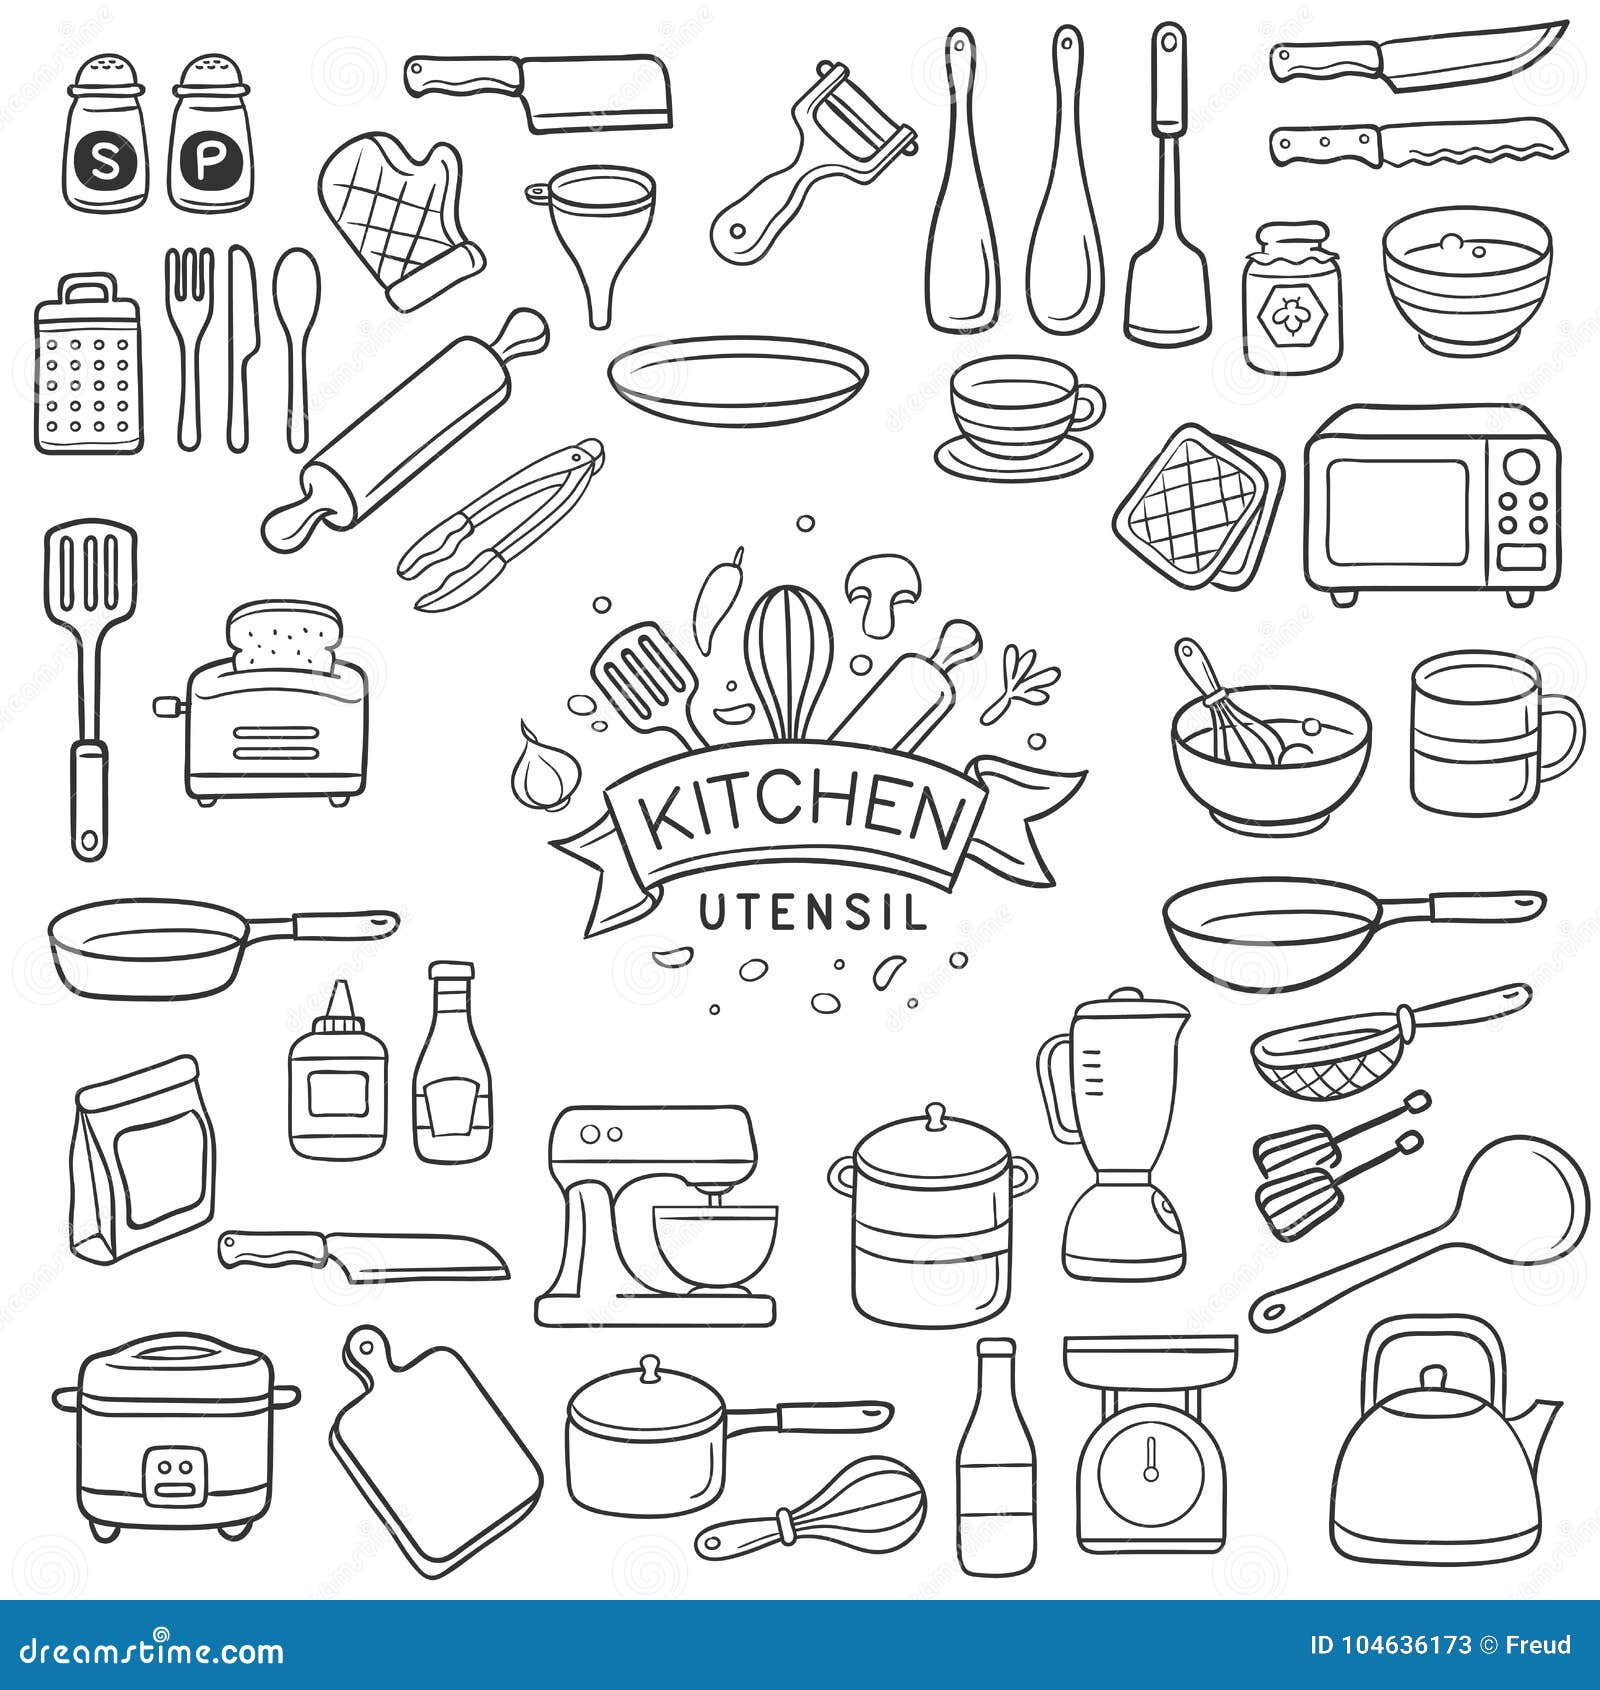 Utensils Kitchen. Cooking Metal Chef Equipment Sketch Style Collection  Stock Vector - Illustration of kitchenware, element: 226063488